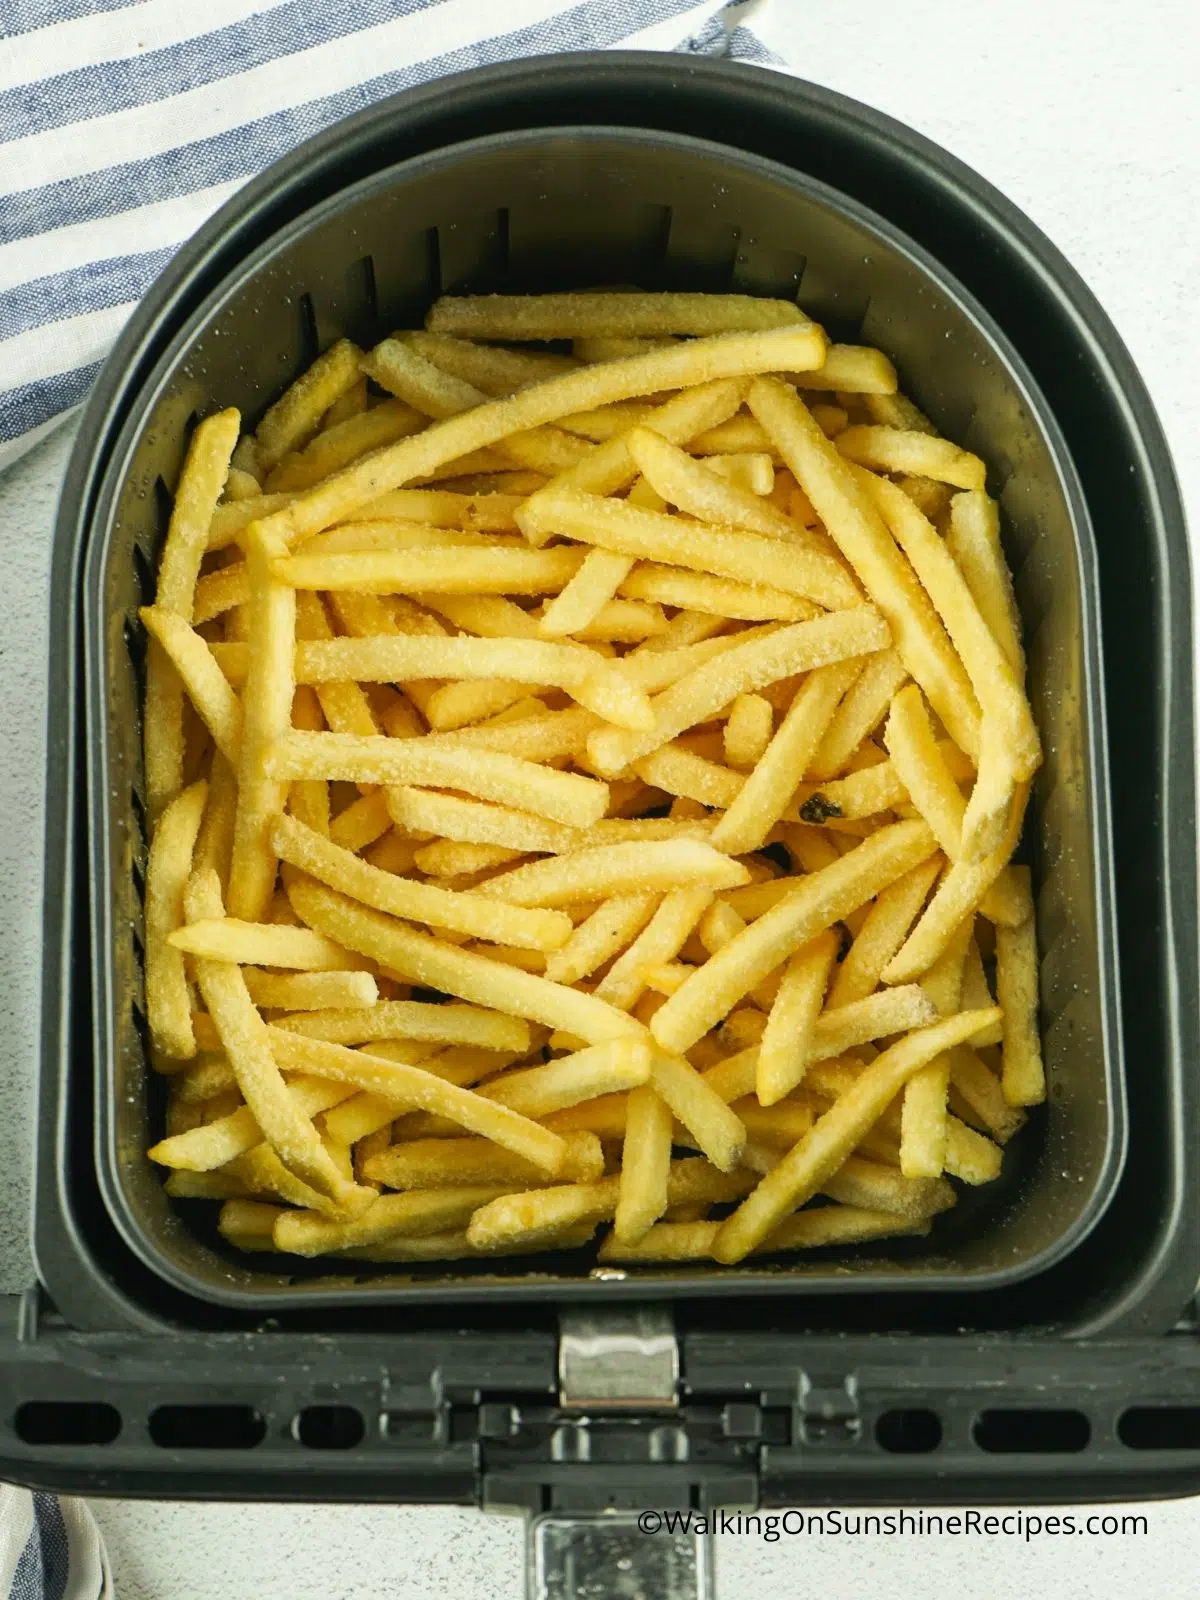 French fries baked in air fryer basket.